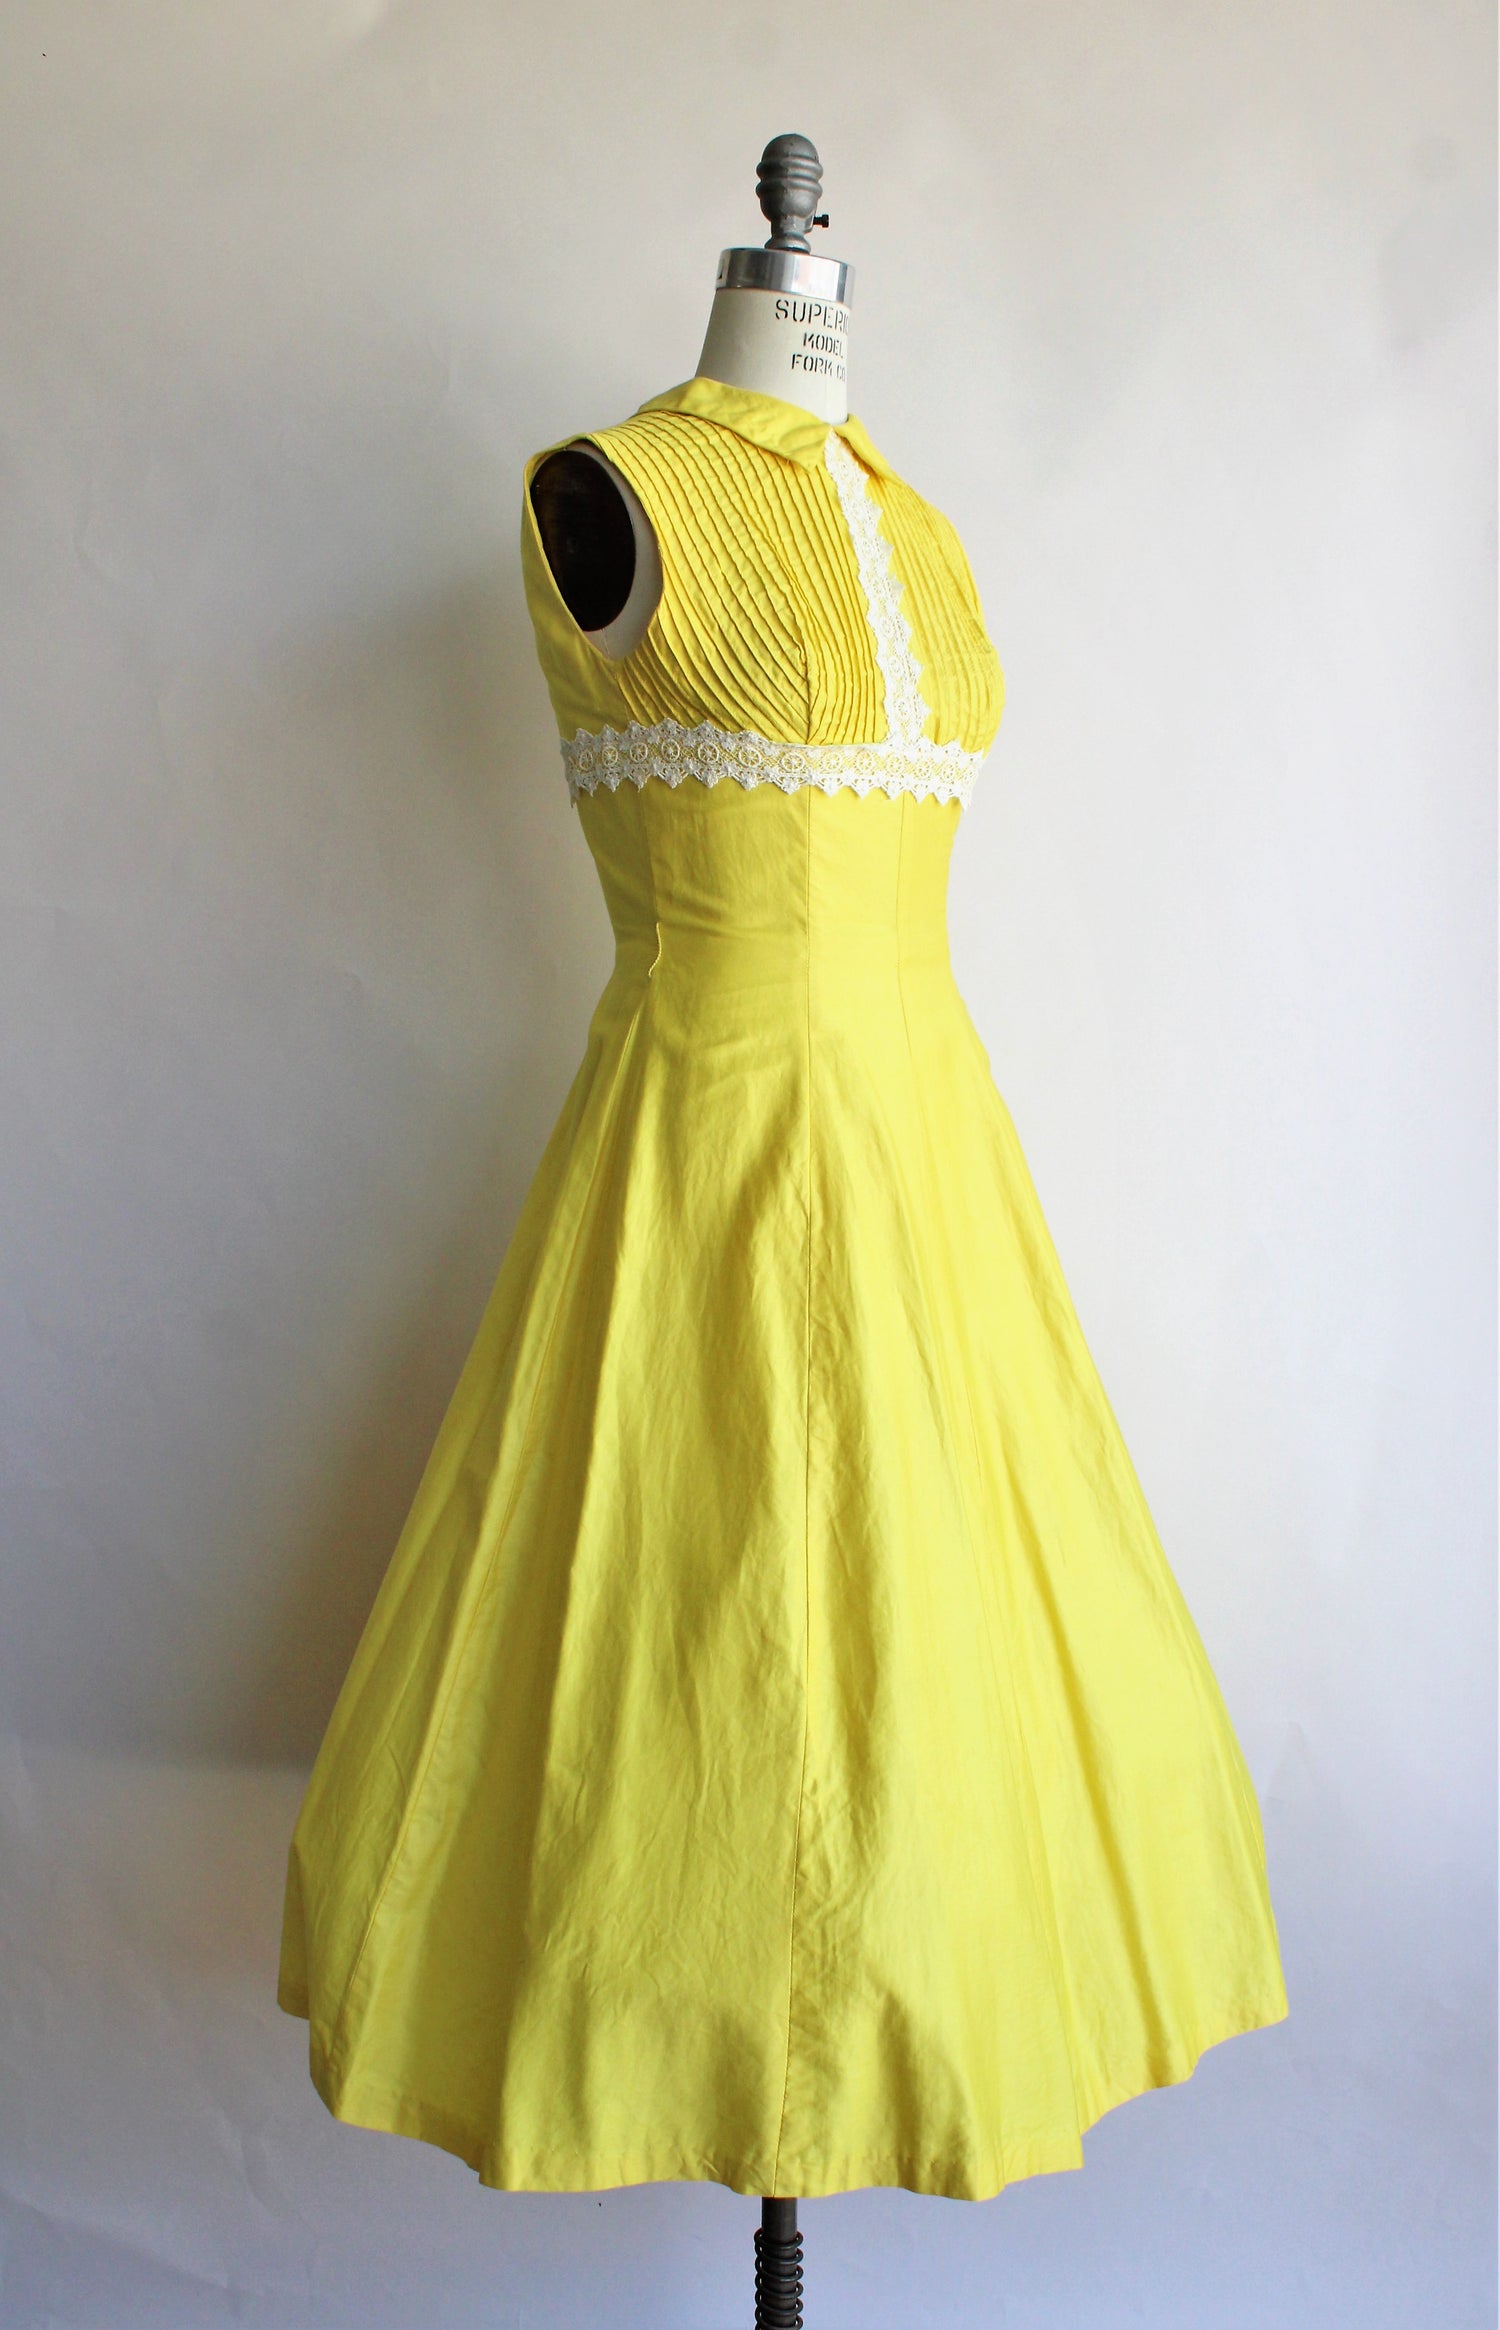 Vintage 1960s Yellow Cotton Dress with White Lace Trim by Teena Paige